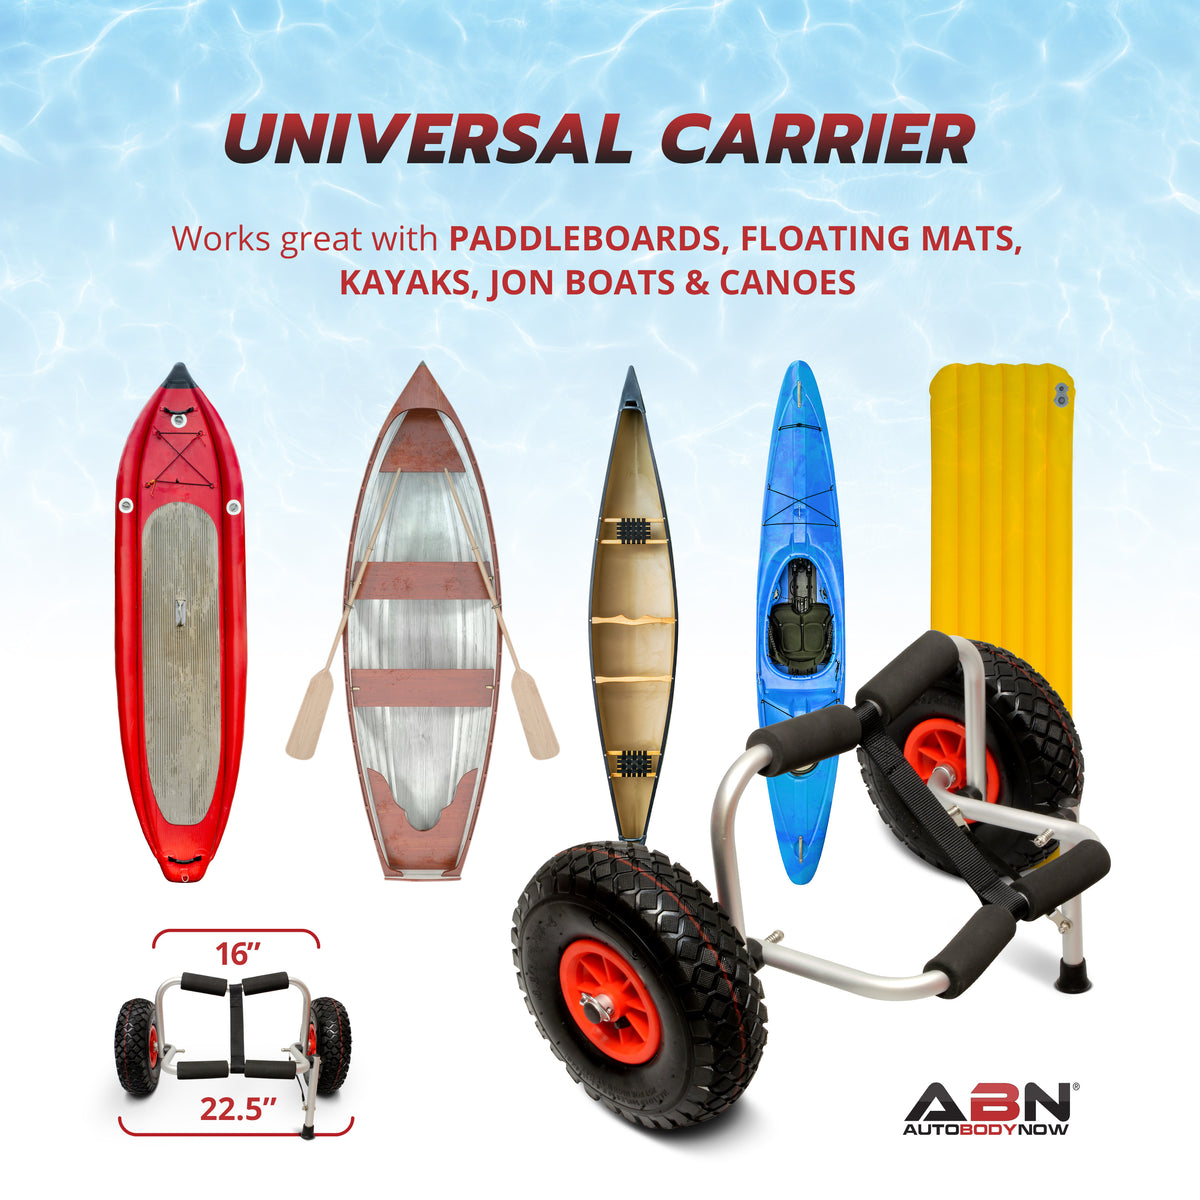 Universal Boat Carrier for Kayaks, Canoes, Paddleboards, and Jon Boats